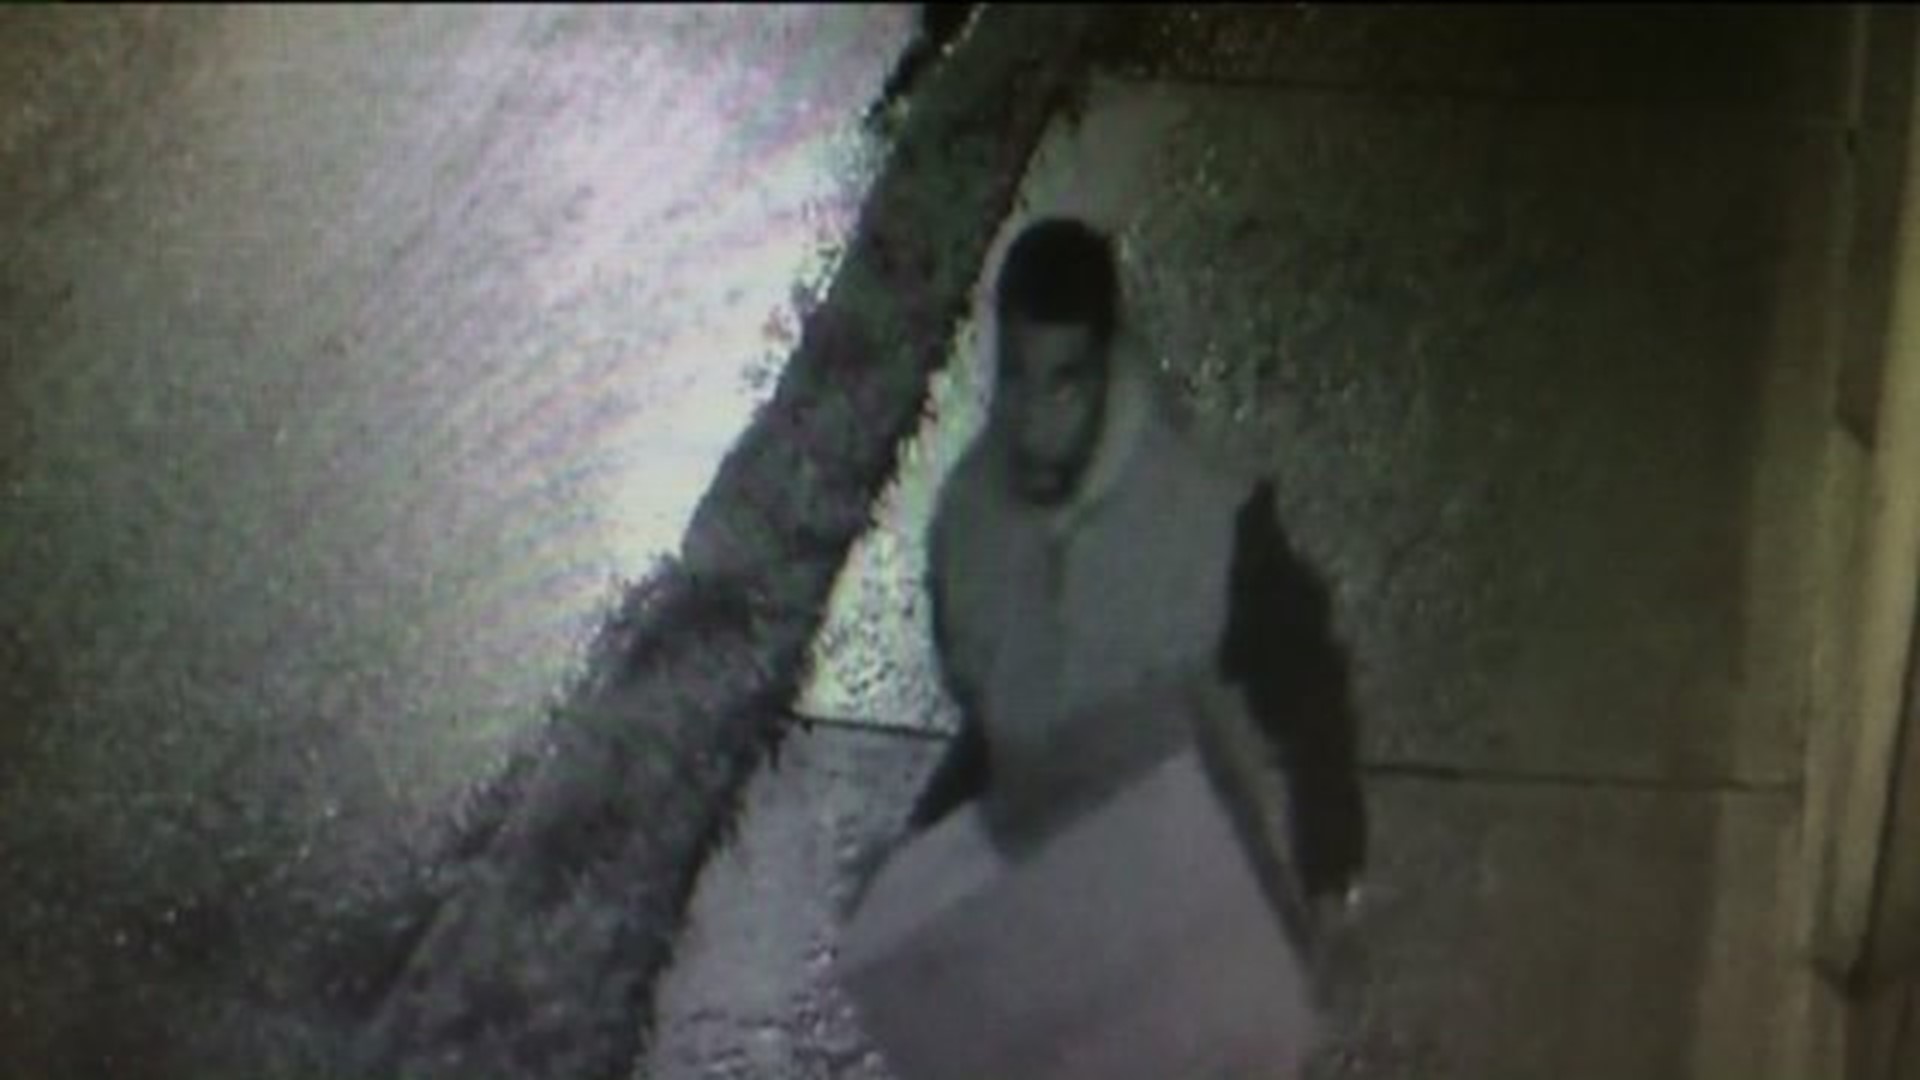 Reports of Packages Stolen from Homes in Scranton